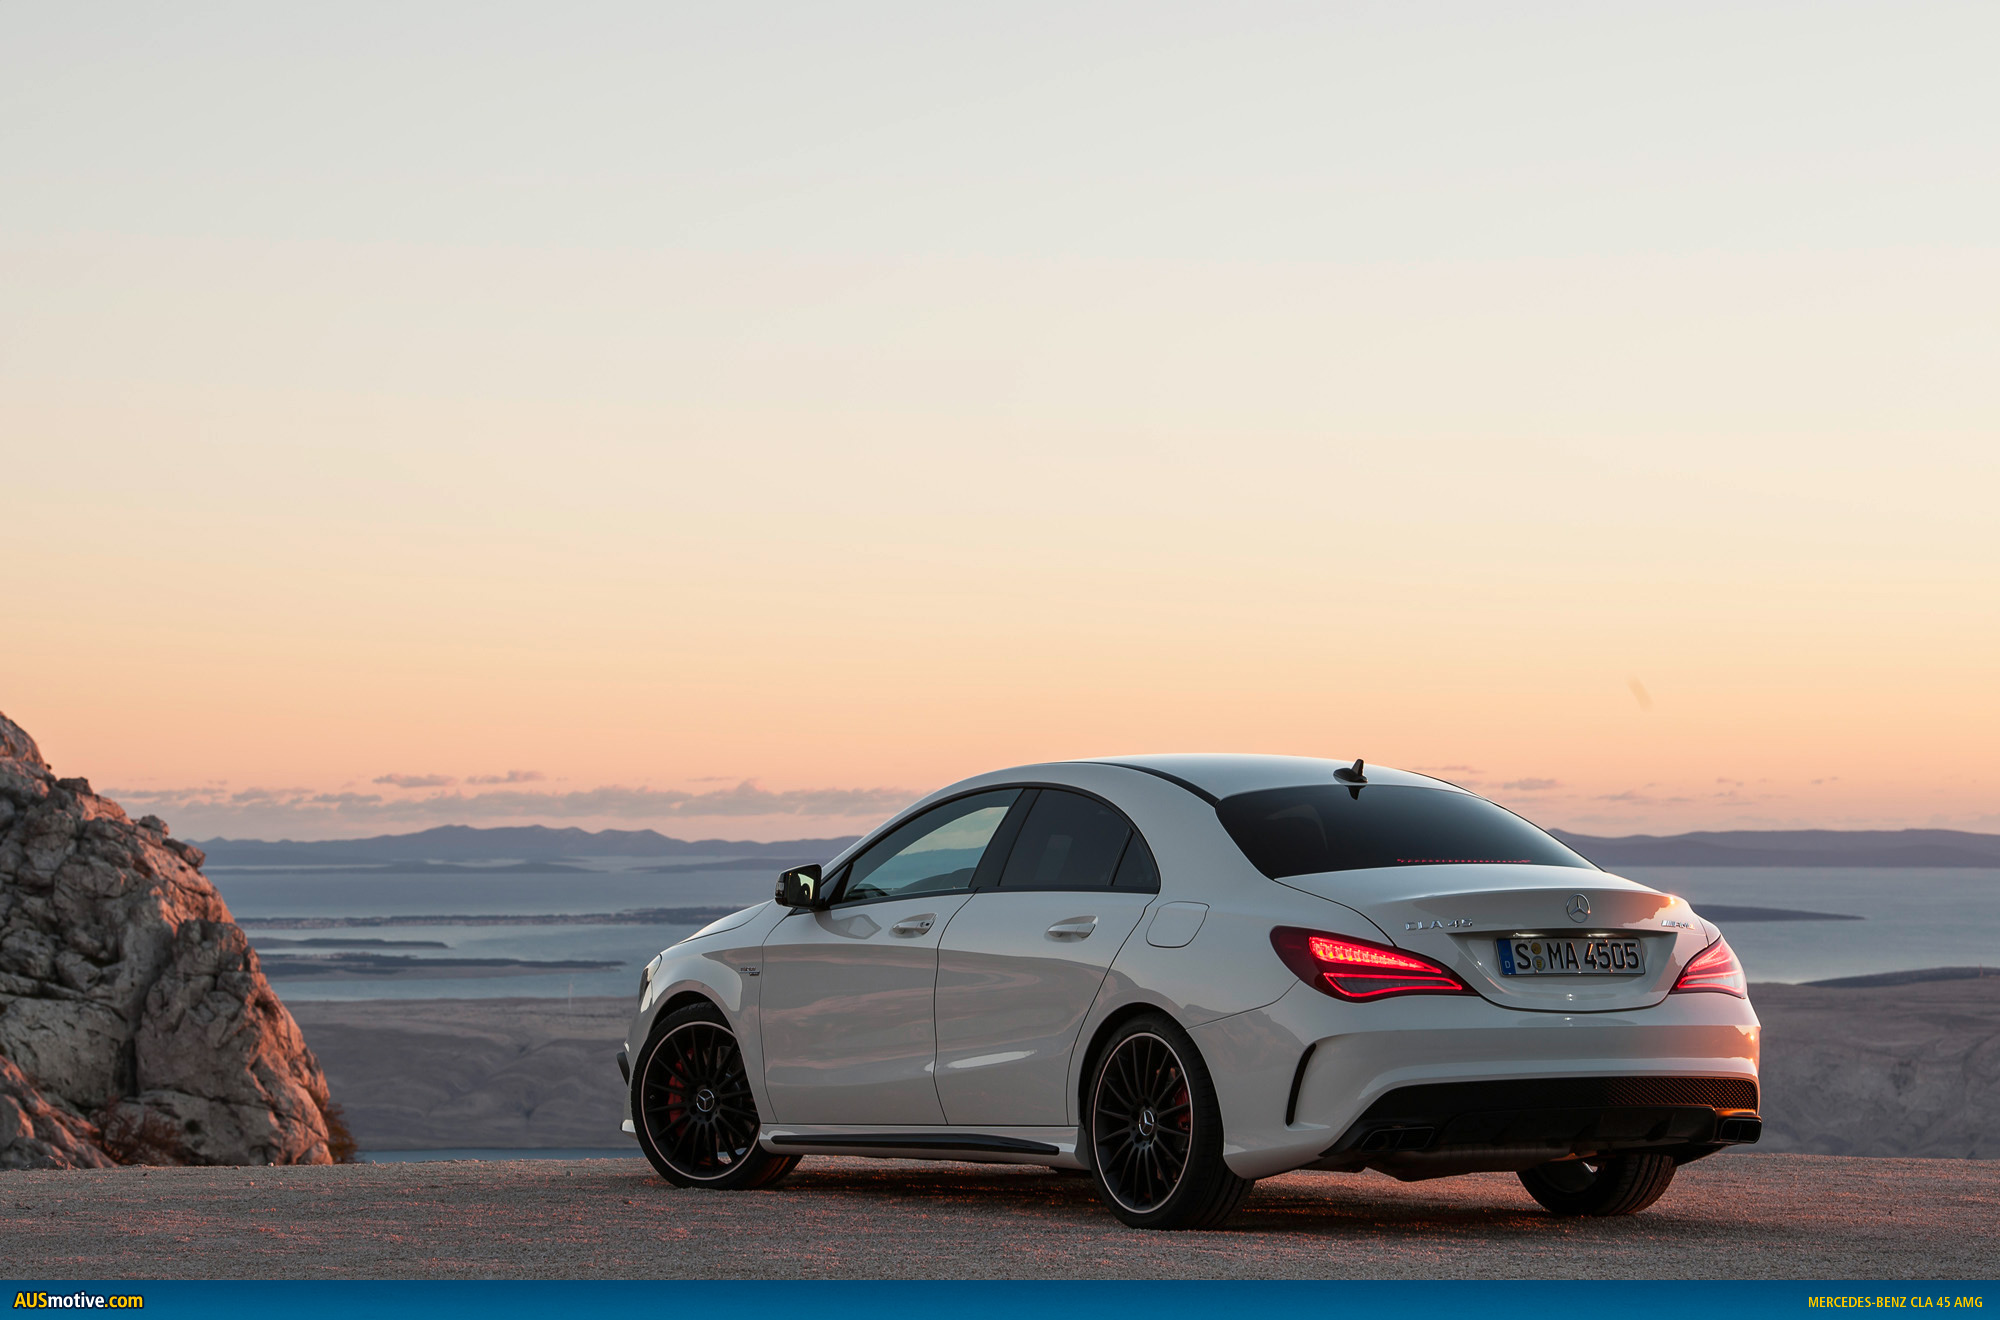 The Mercedes-Benz CLA 45 AMG – Design meets Driving Performance